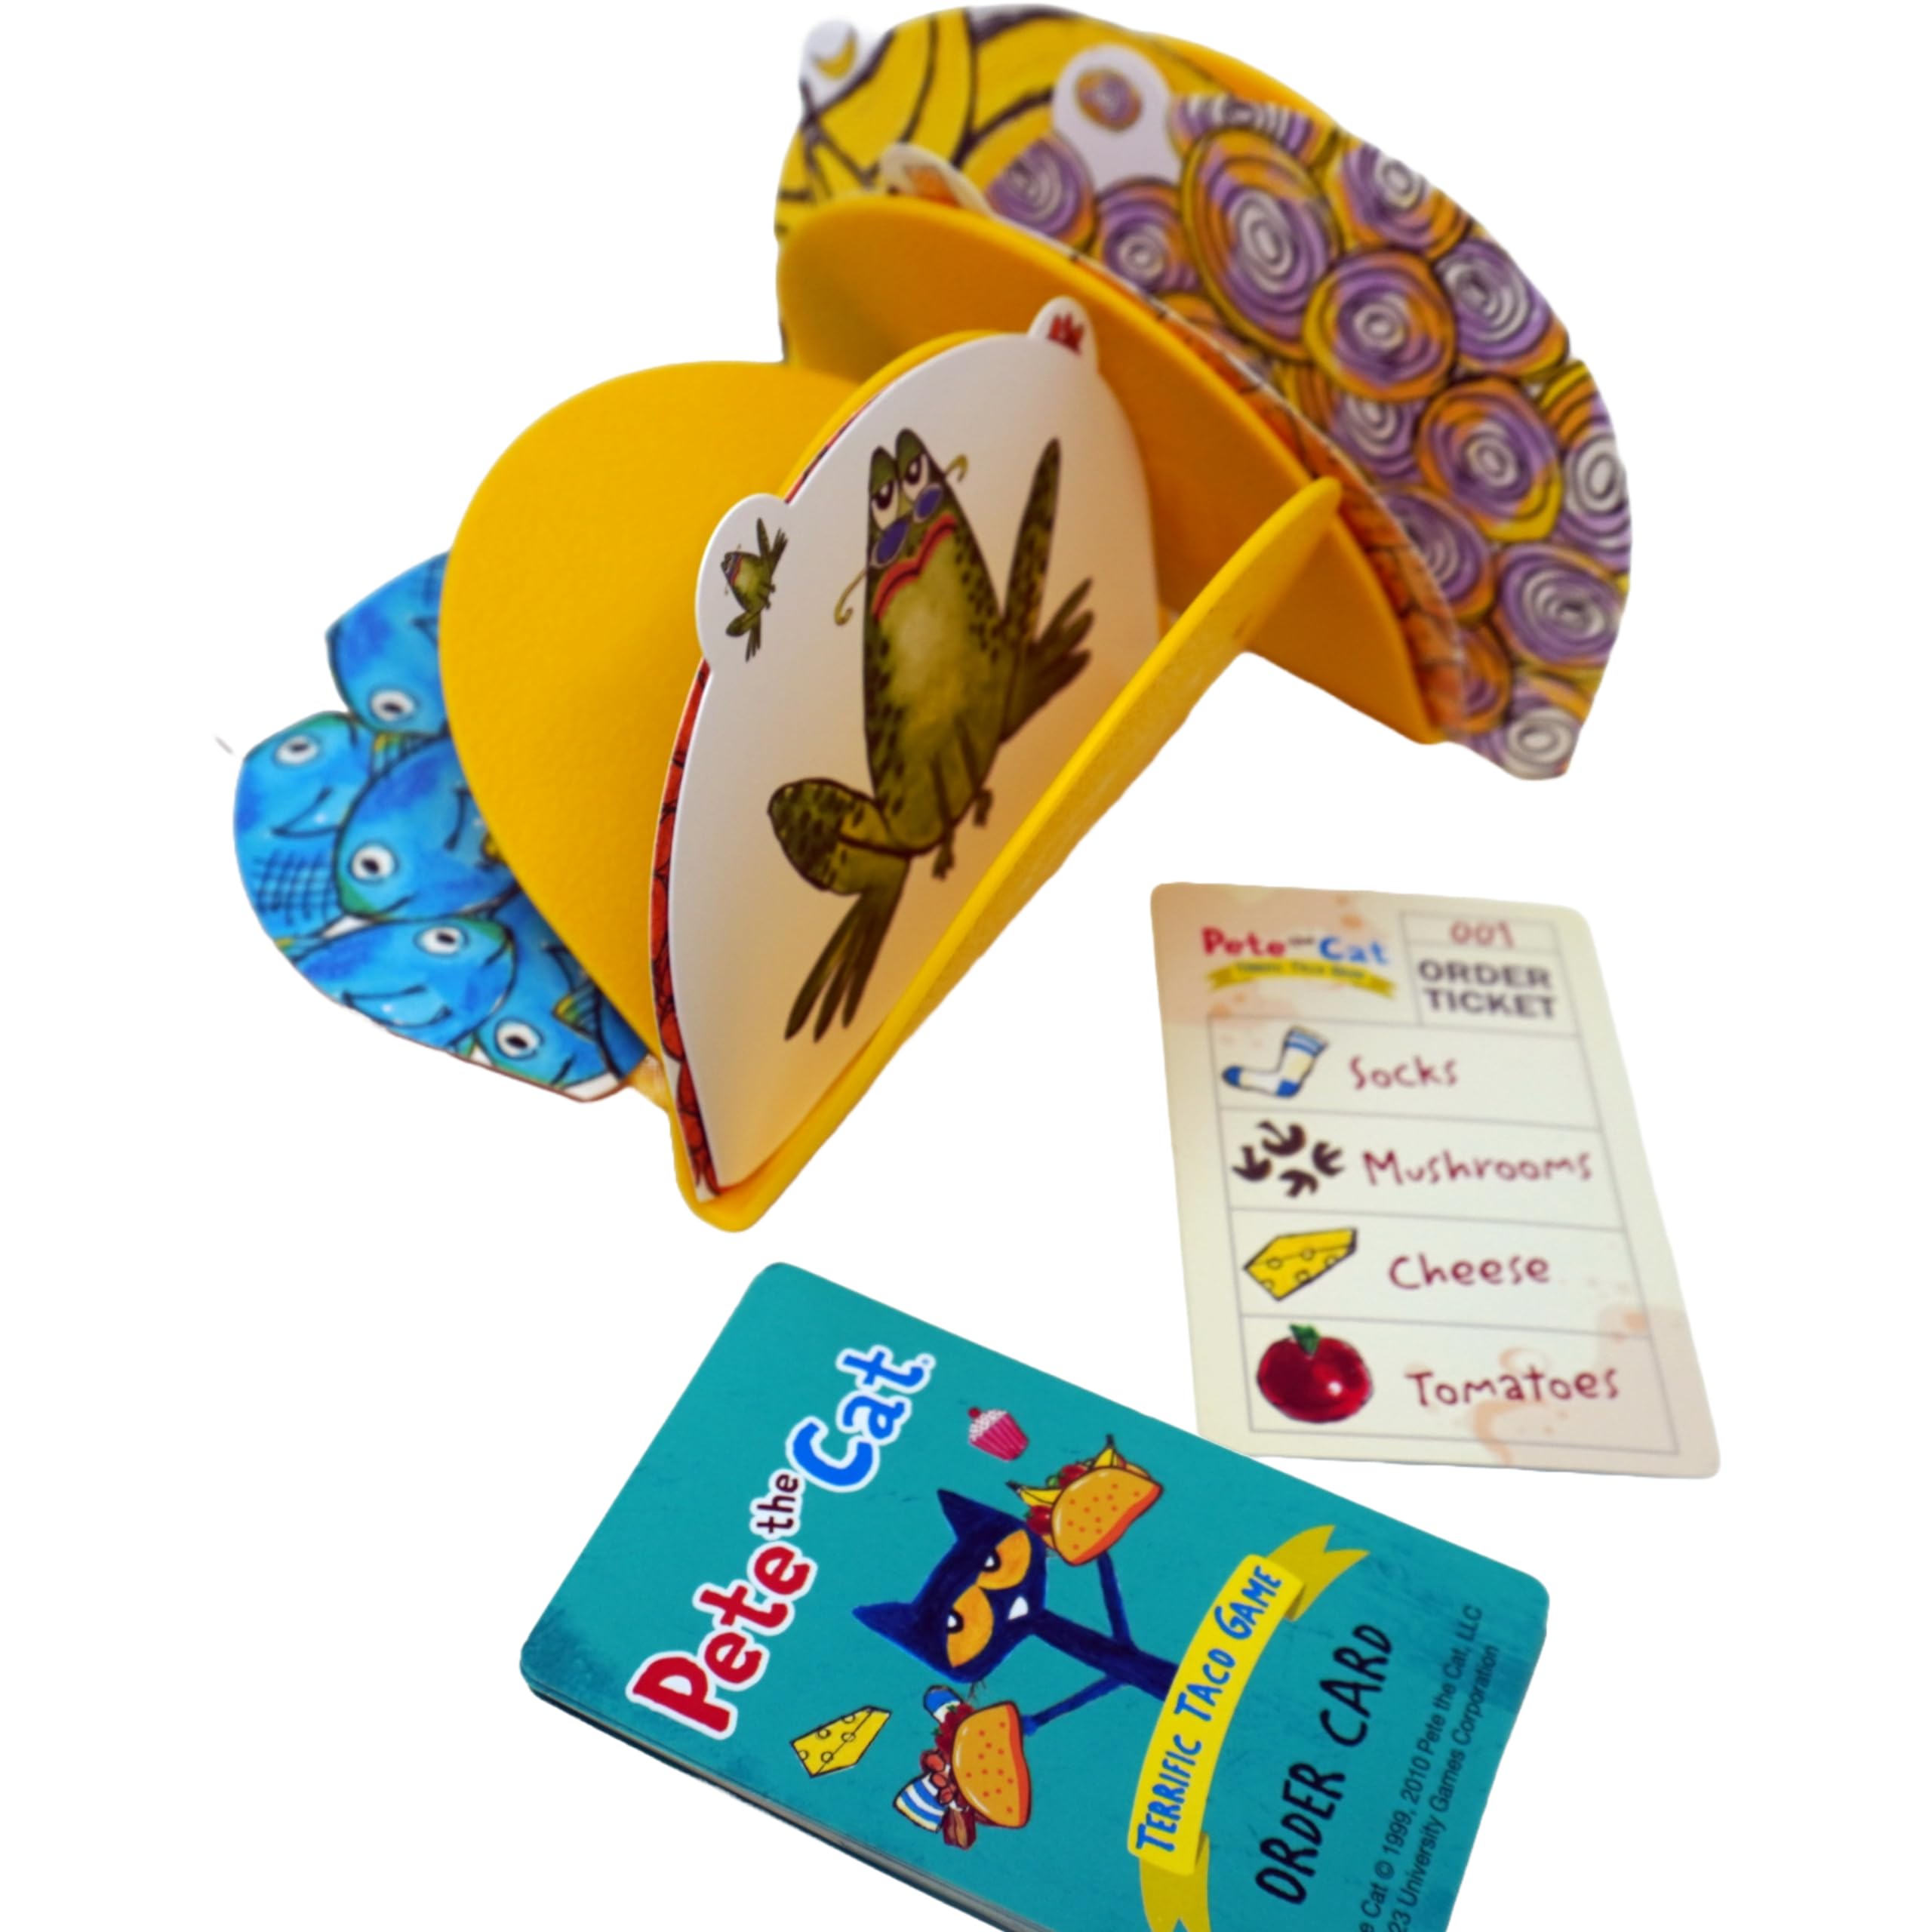 Briarpatch | Pete The Cat Terrific Taco Game, Fans of Pete The Cat Books, Ages 3+